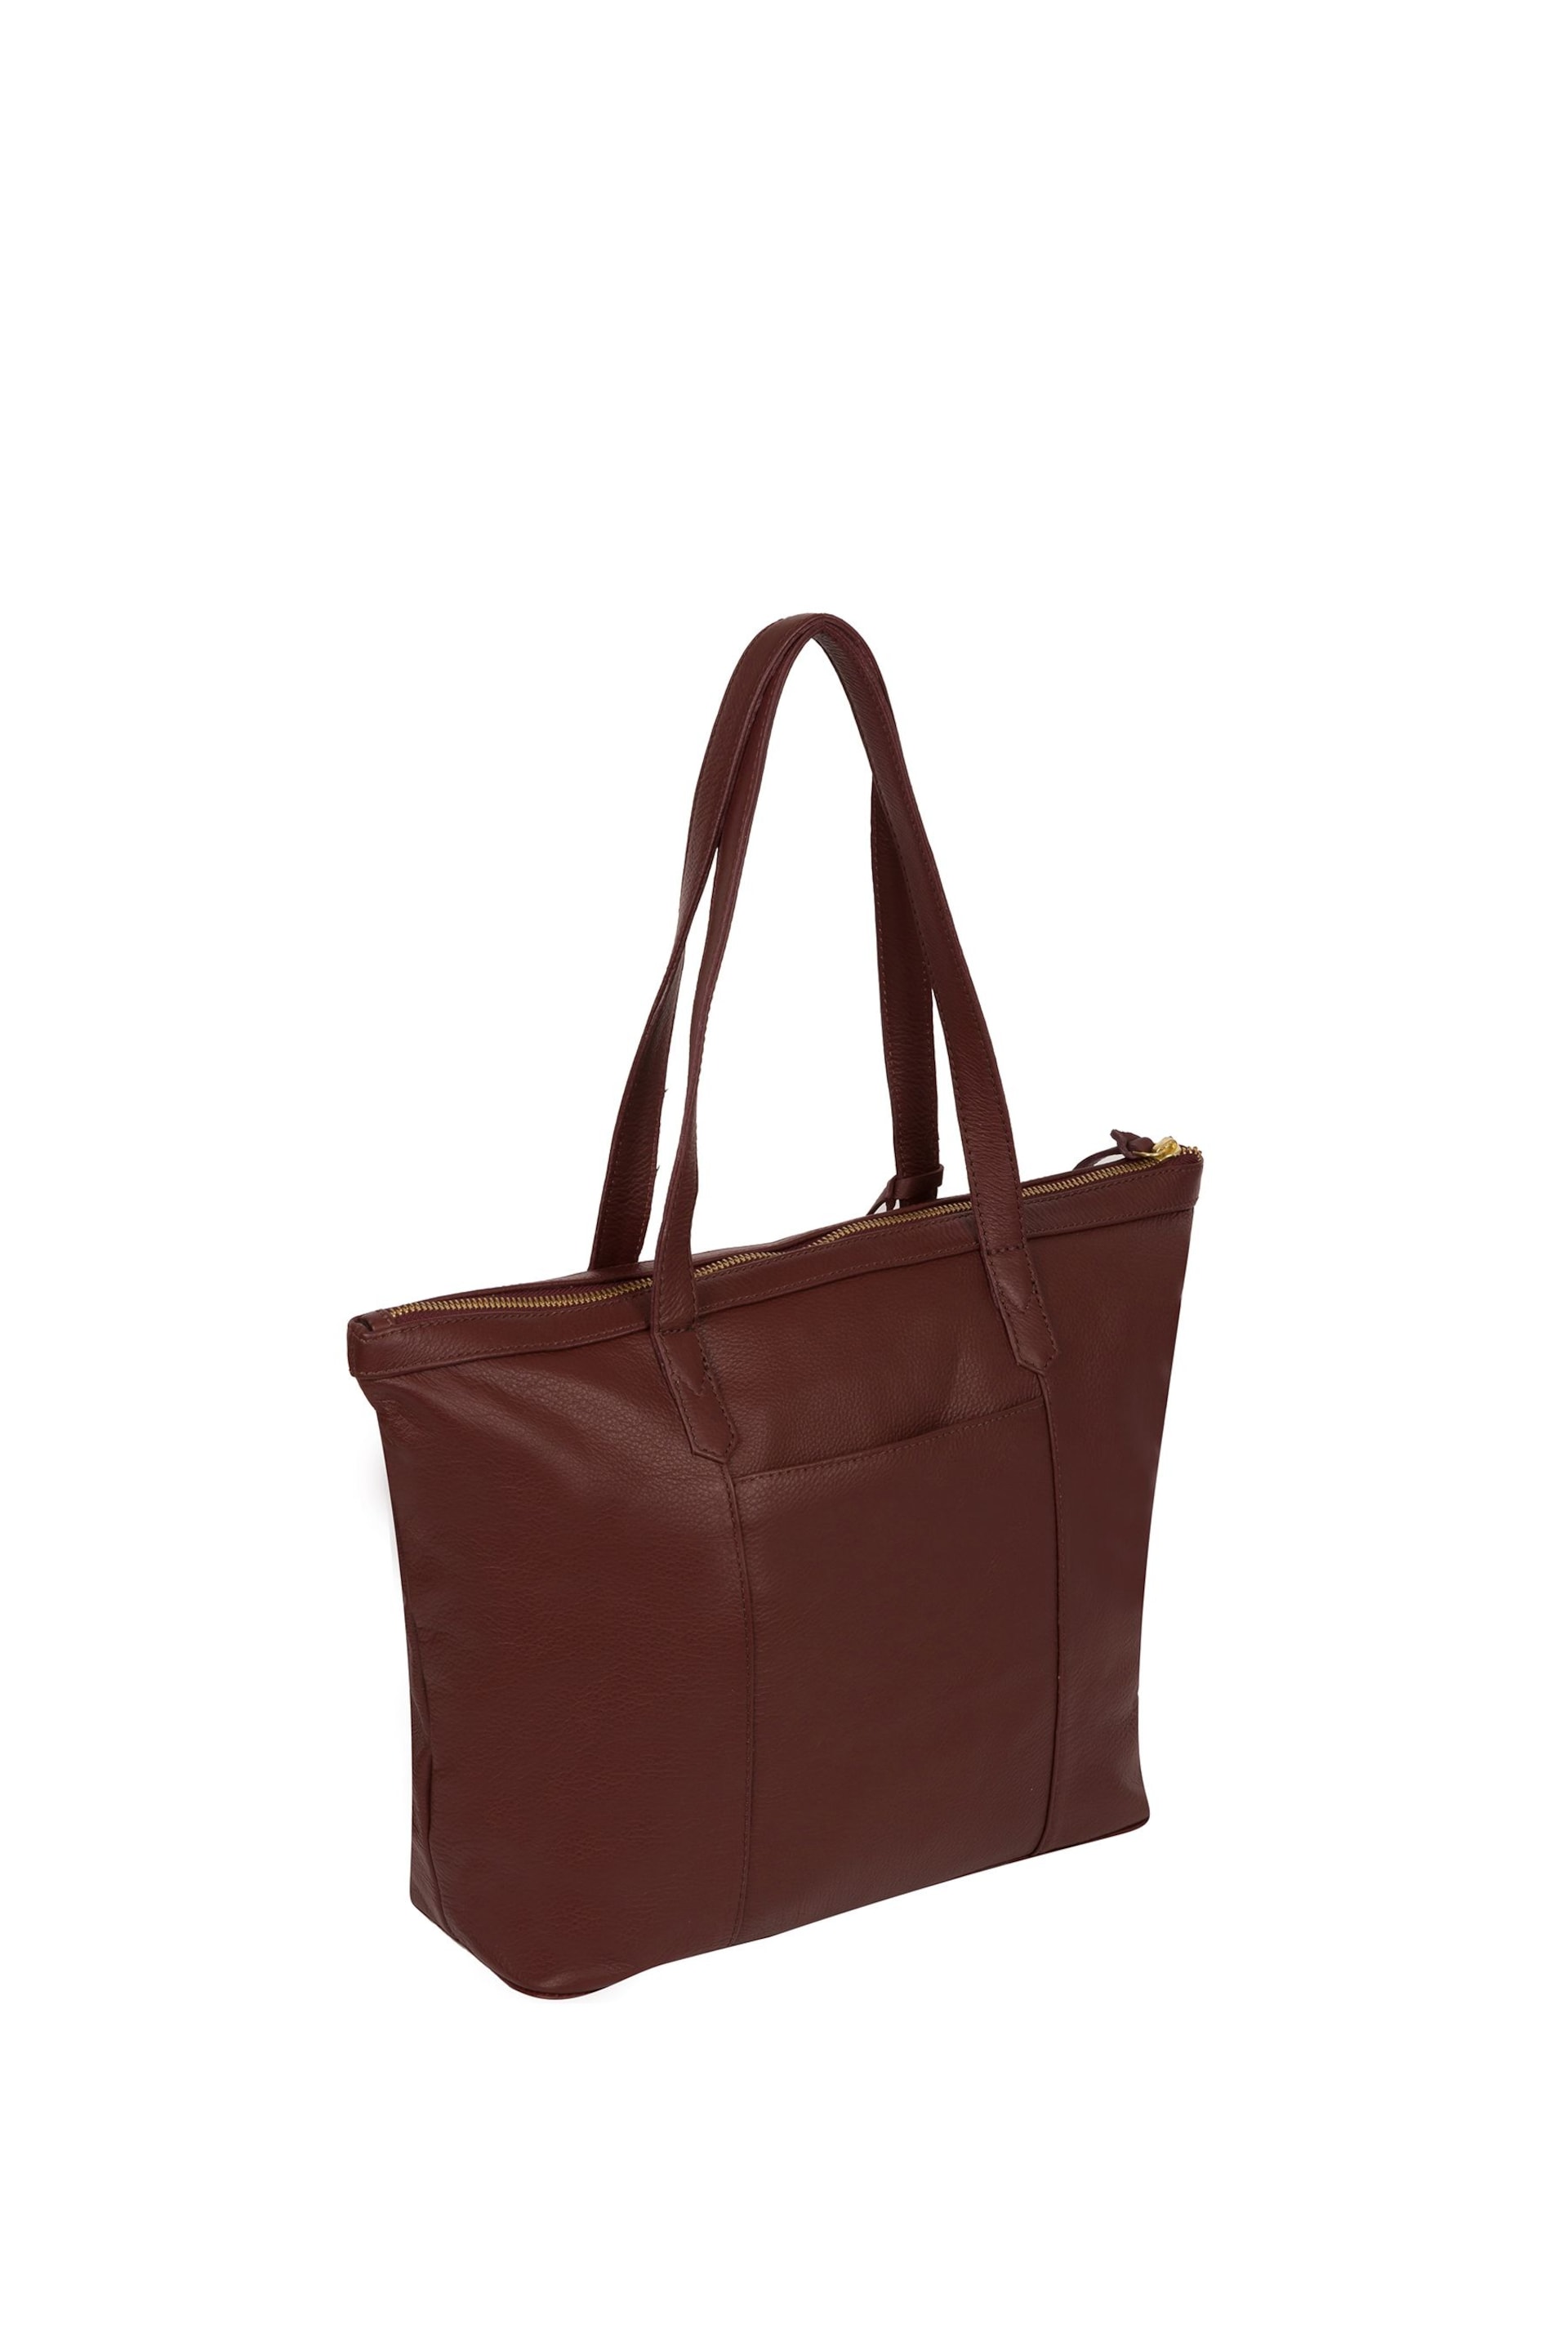 Cultured London Heston Leather Tote Bag - Image 4 of 5